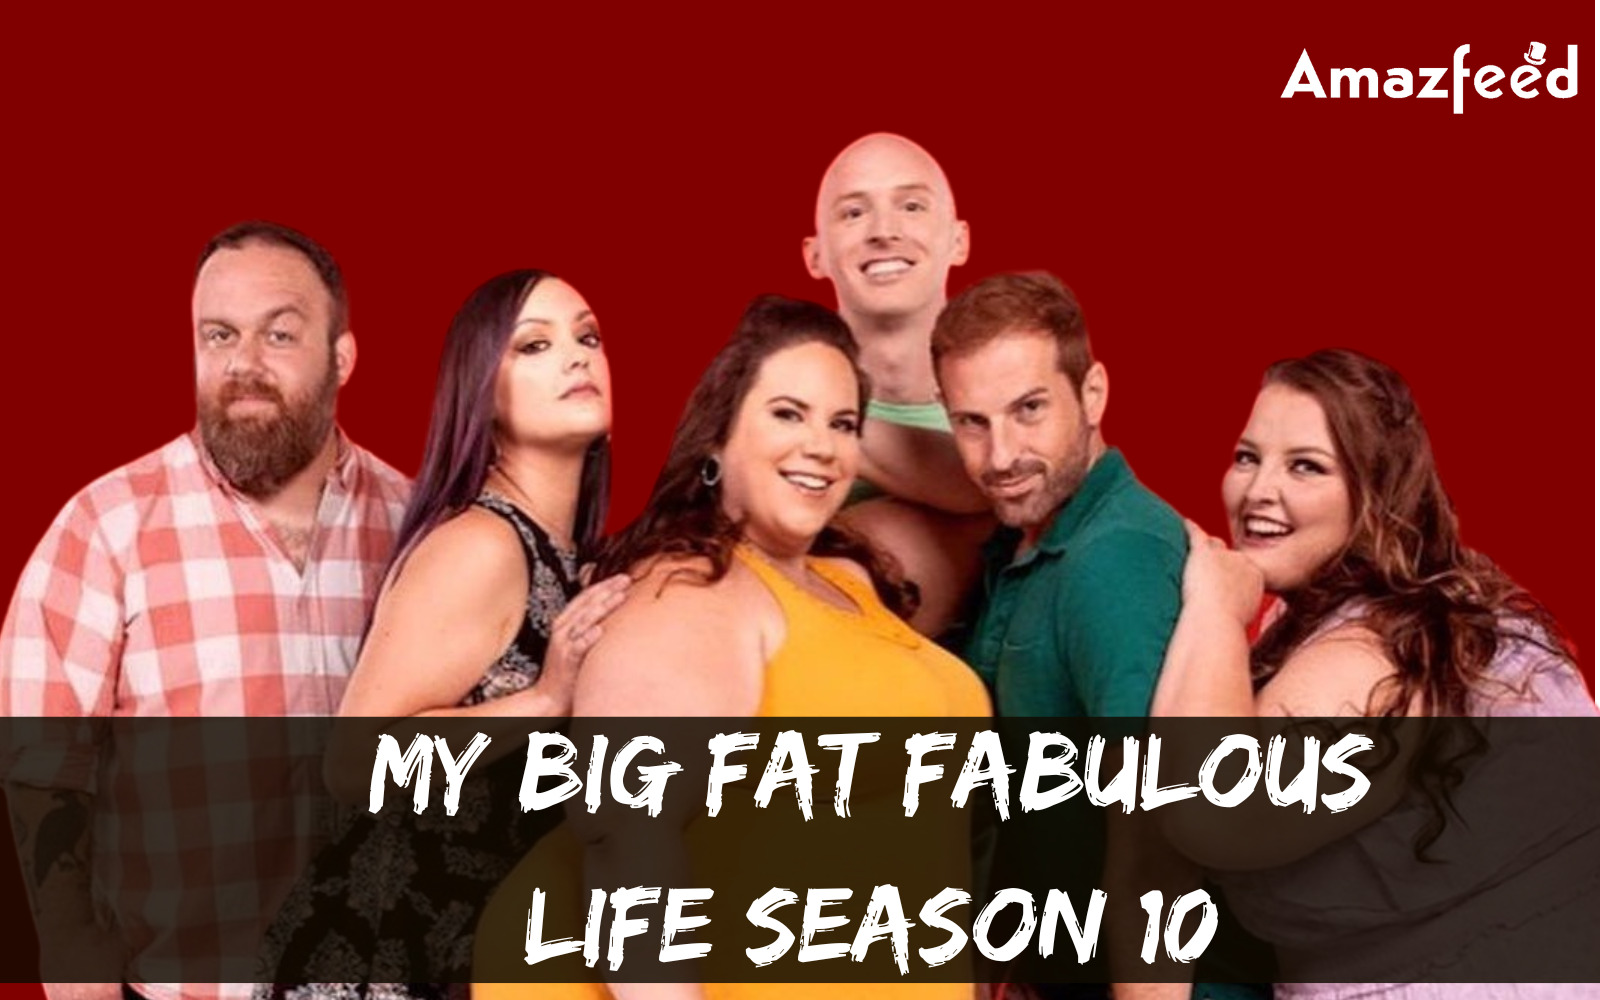 What can the viewers expect from My Big Fat Fabulous Life season 10 (1)